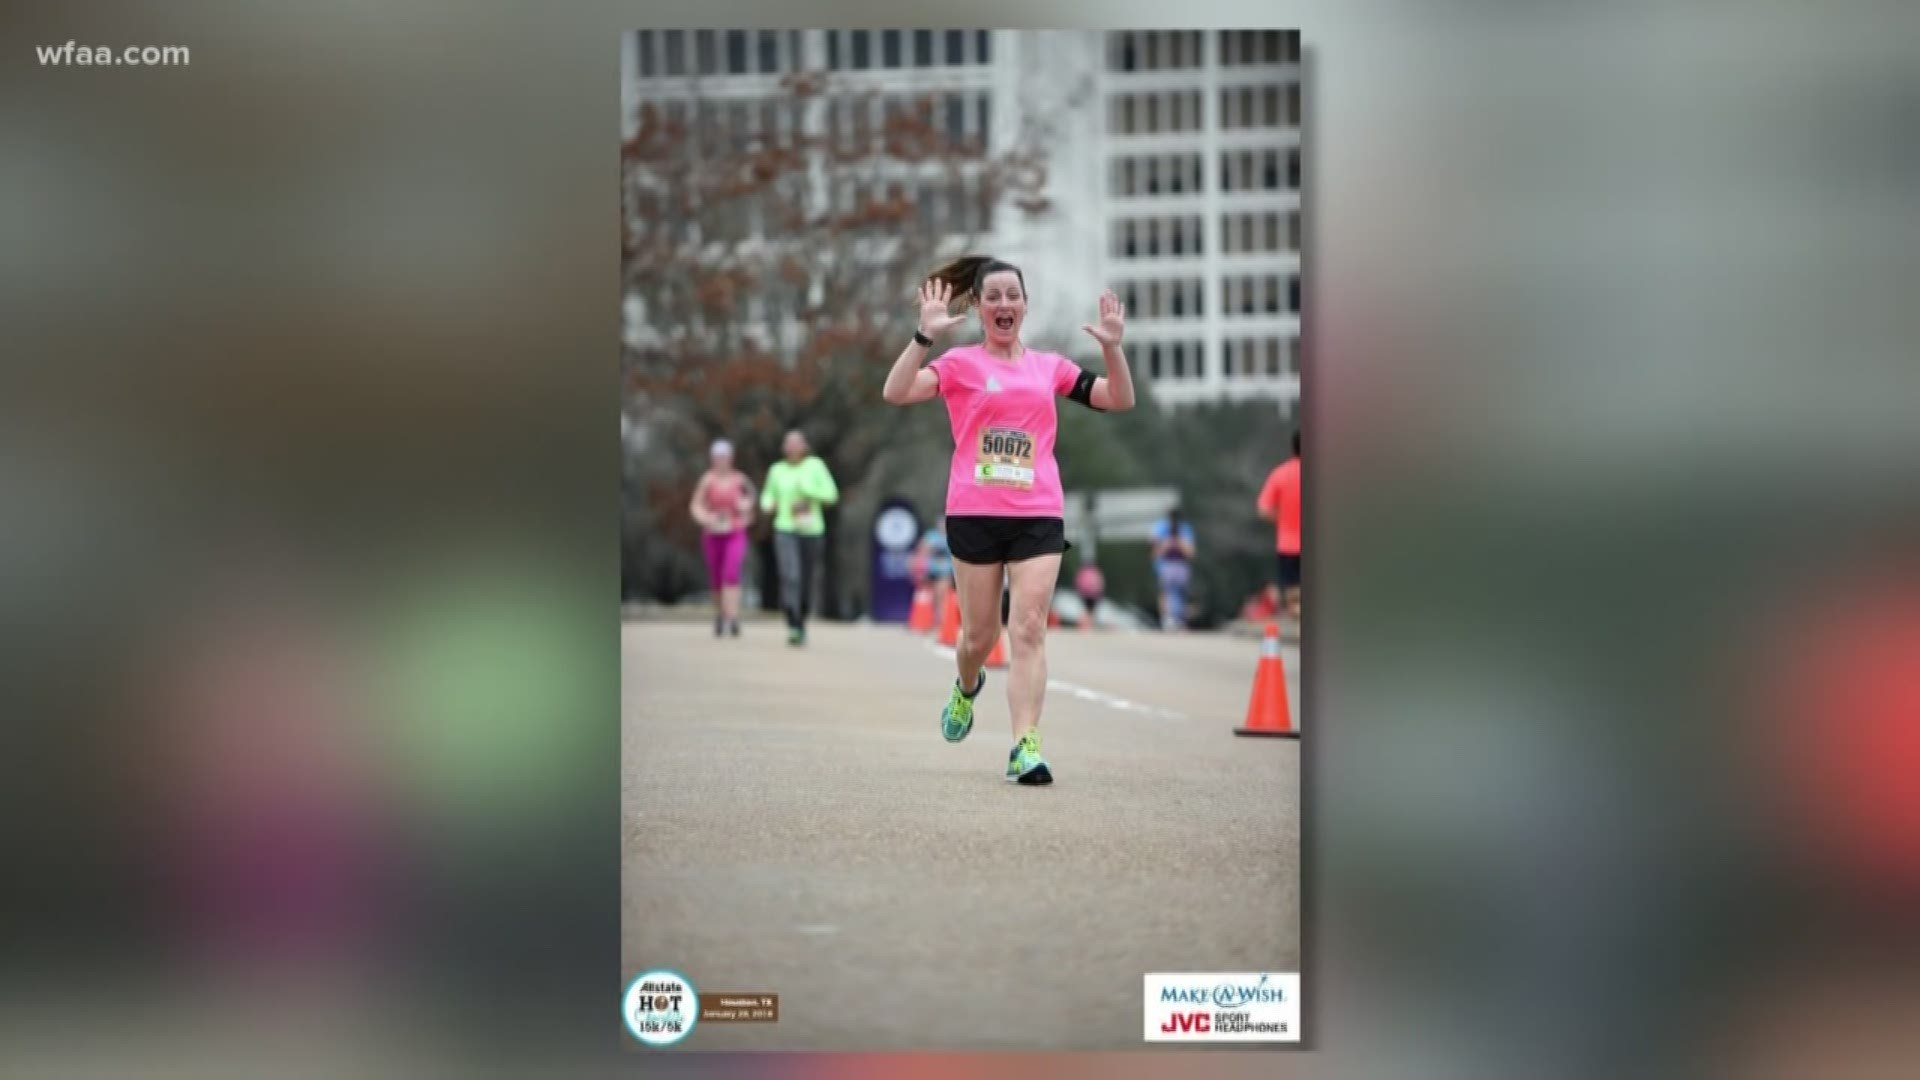 Teresa Woodard is running the full Dallas Marathon this upcoming weekend. She has a special message for herself and all the fellow runners out there.